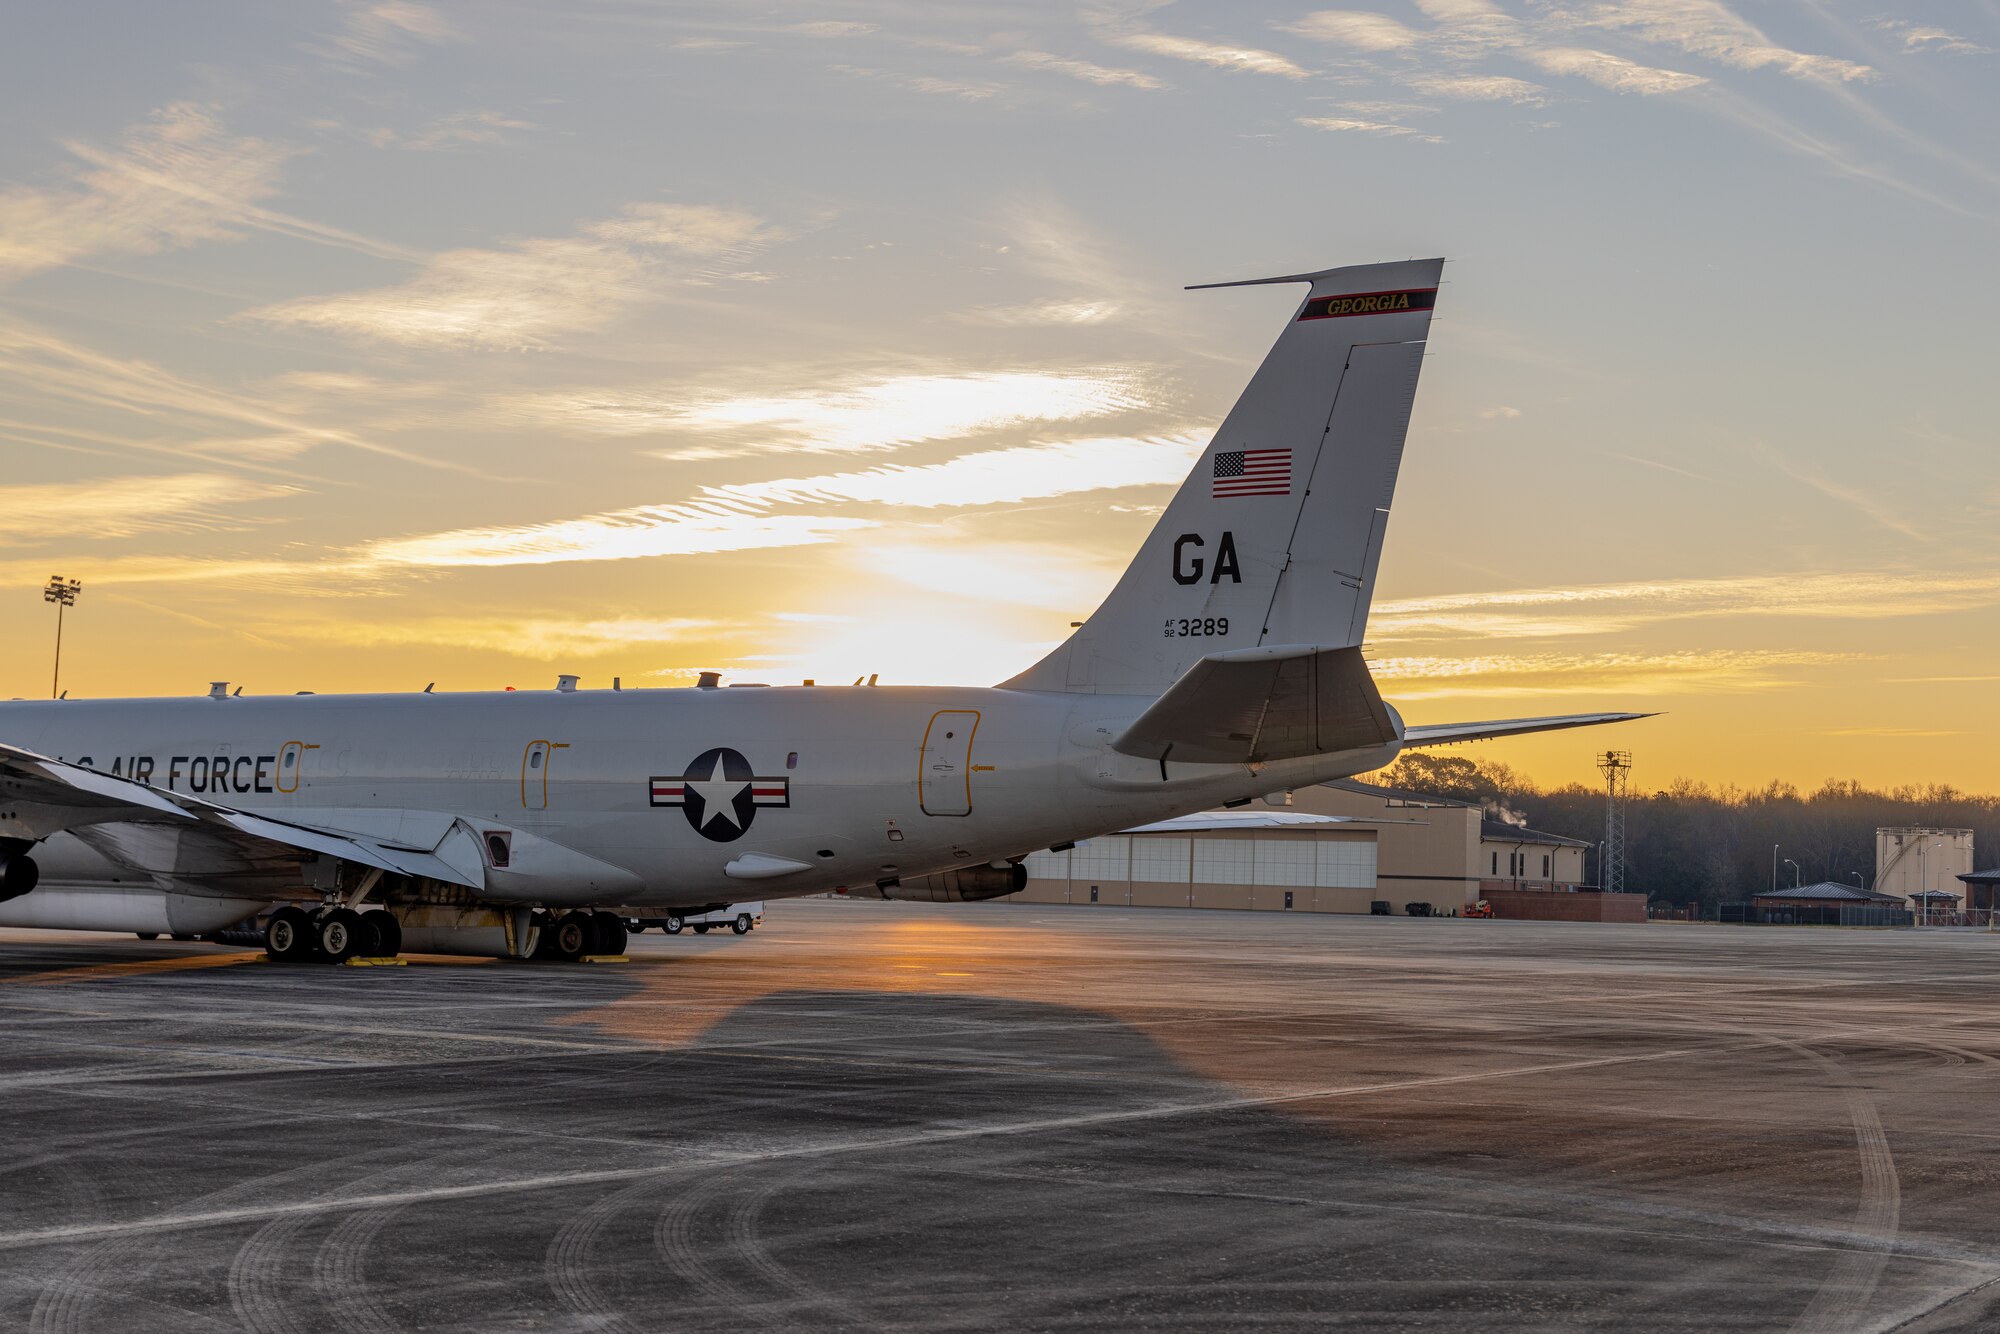 An E-8C Joint STARS aircraft sits on the ramp at Robins Air Force Base, Georgia, Feb. 11, 2022. The primary mission of Joint STARS is to provide theater ground and air commanders with ground surveillance to support attack operations and targeting that contributes to the delay, disruption and destruction of enemy forces. (U.S. Air National Guard photo by Tech. Sgt. Jeff Rice)